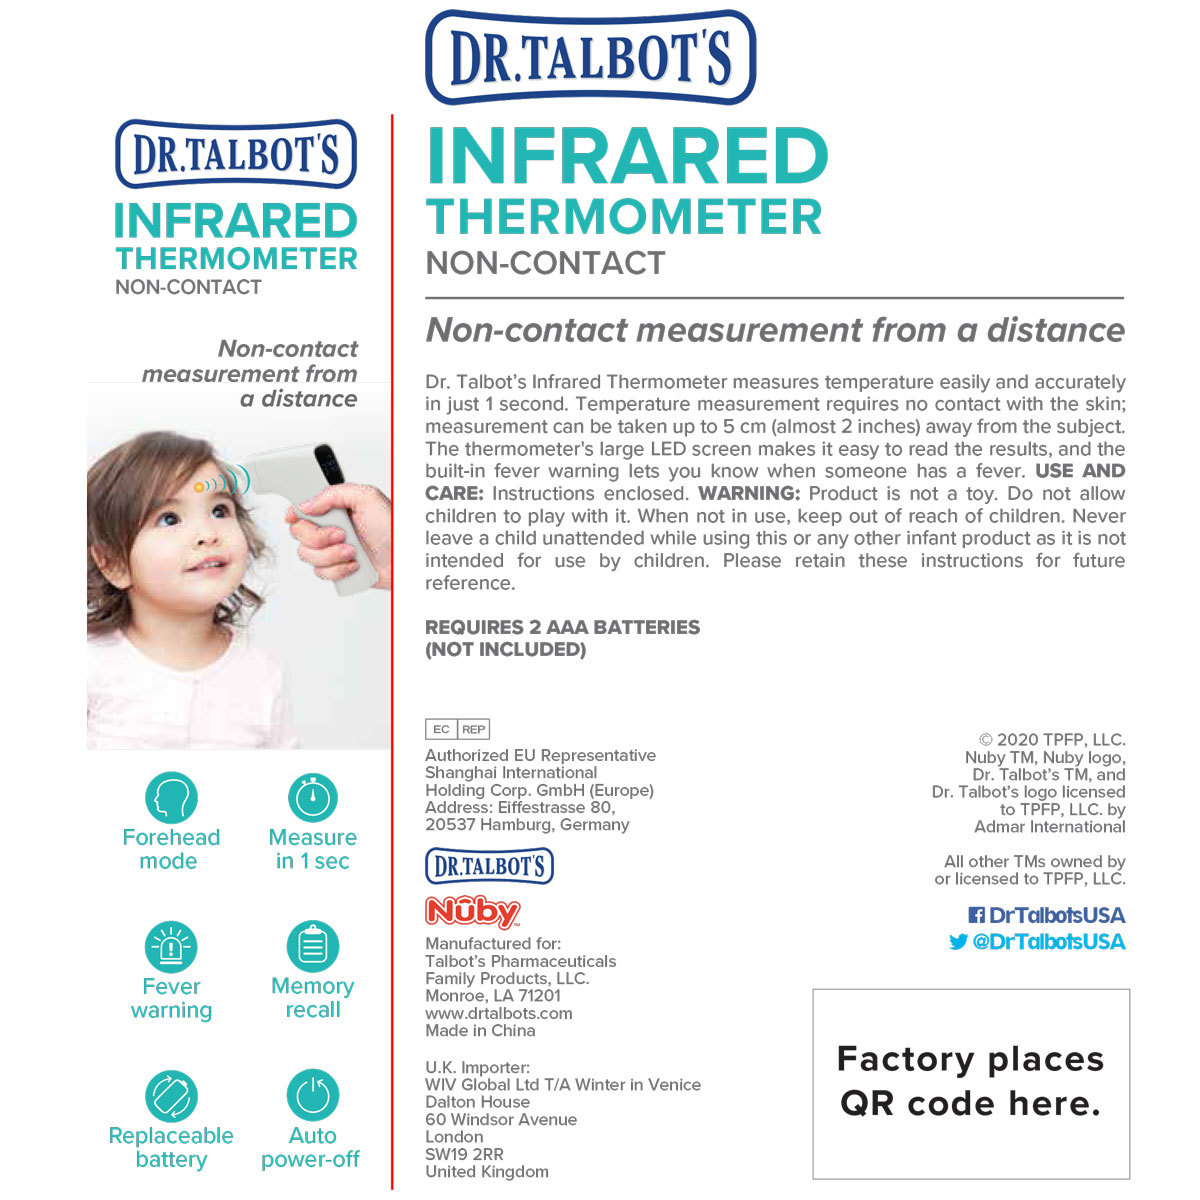 Dr Talbot's Infrared Non-Contact Thermometer 800000